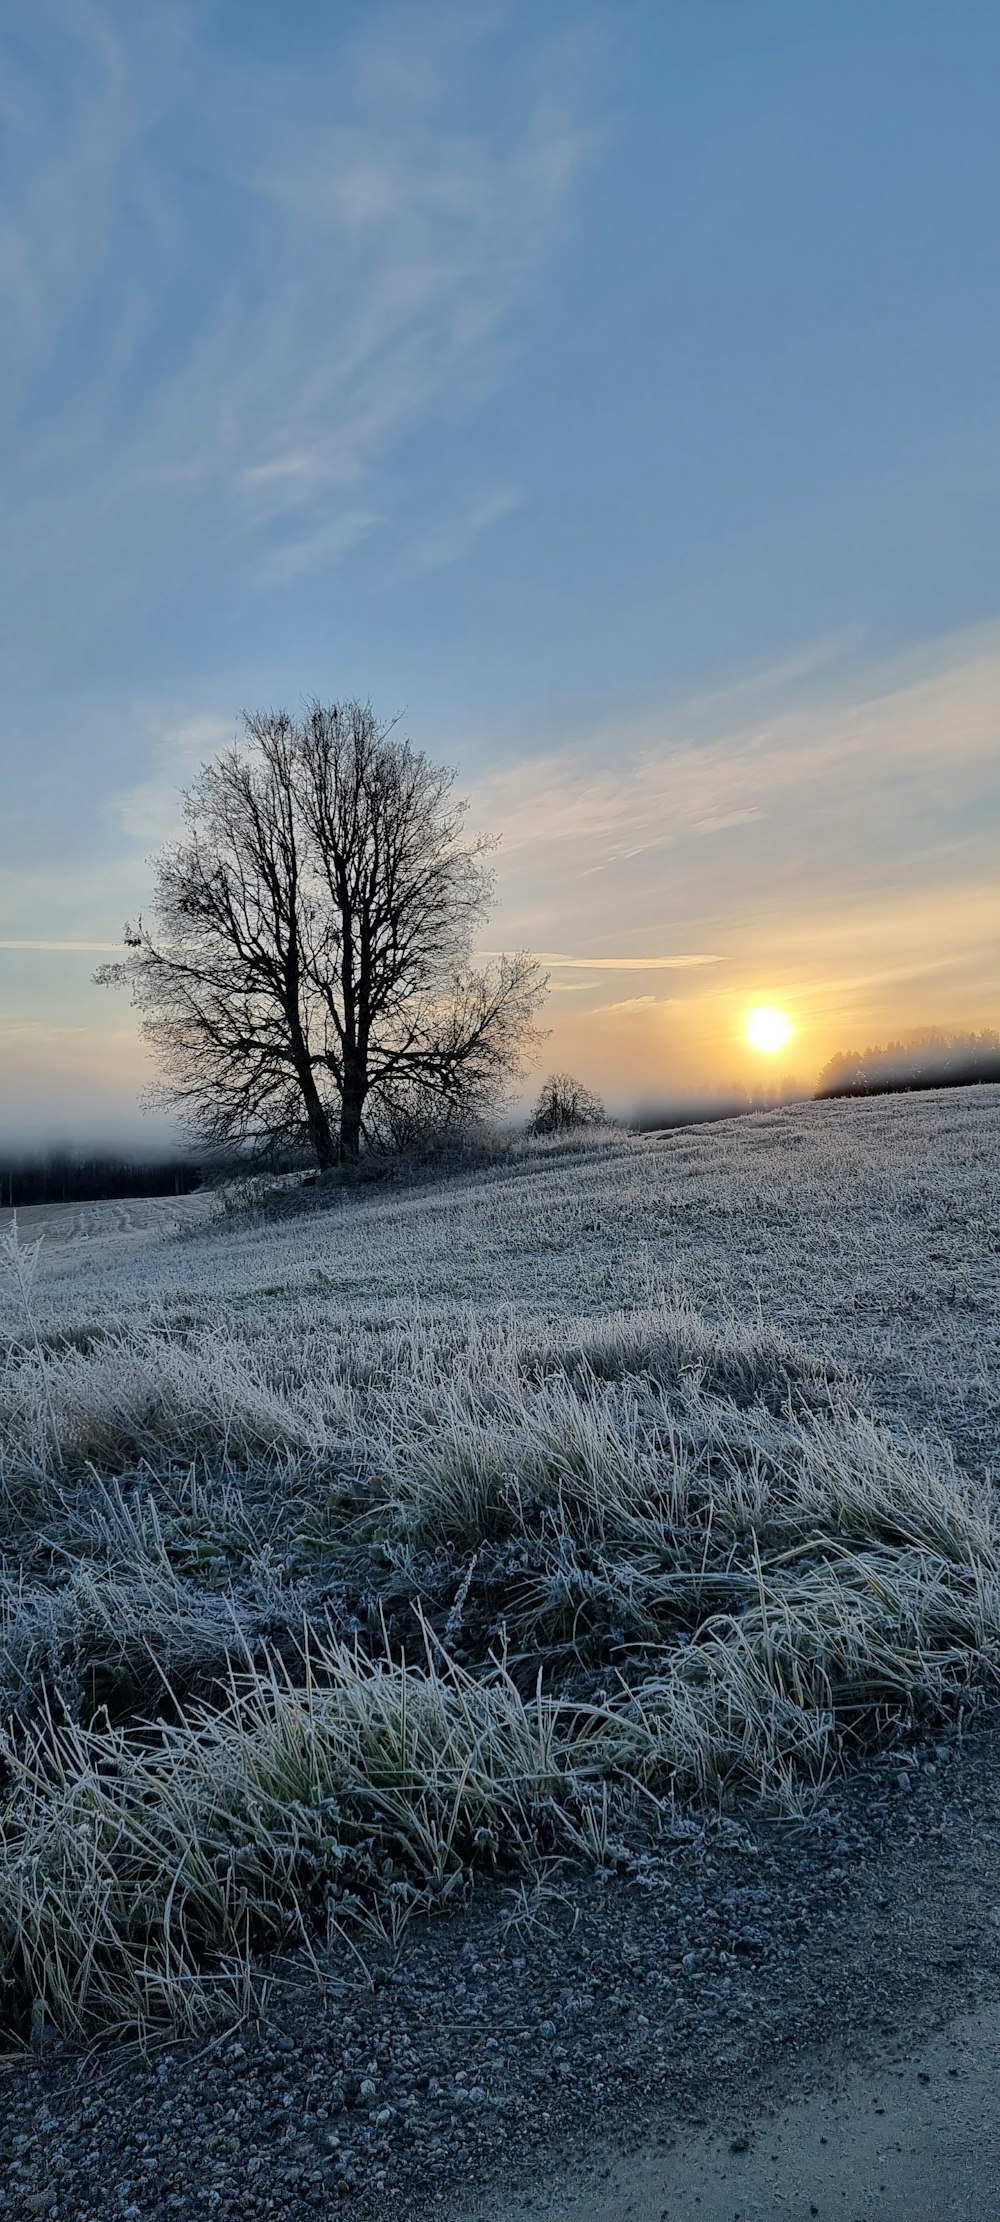 a frosty field with a lone tree in the distance